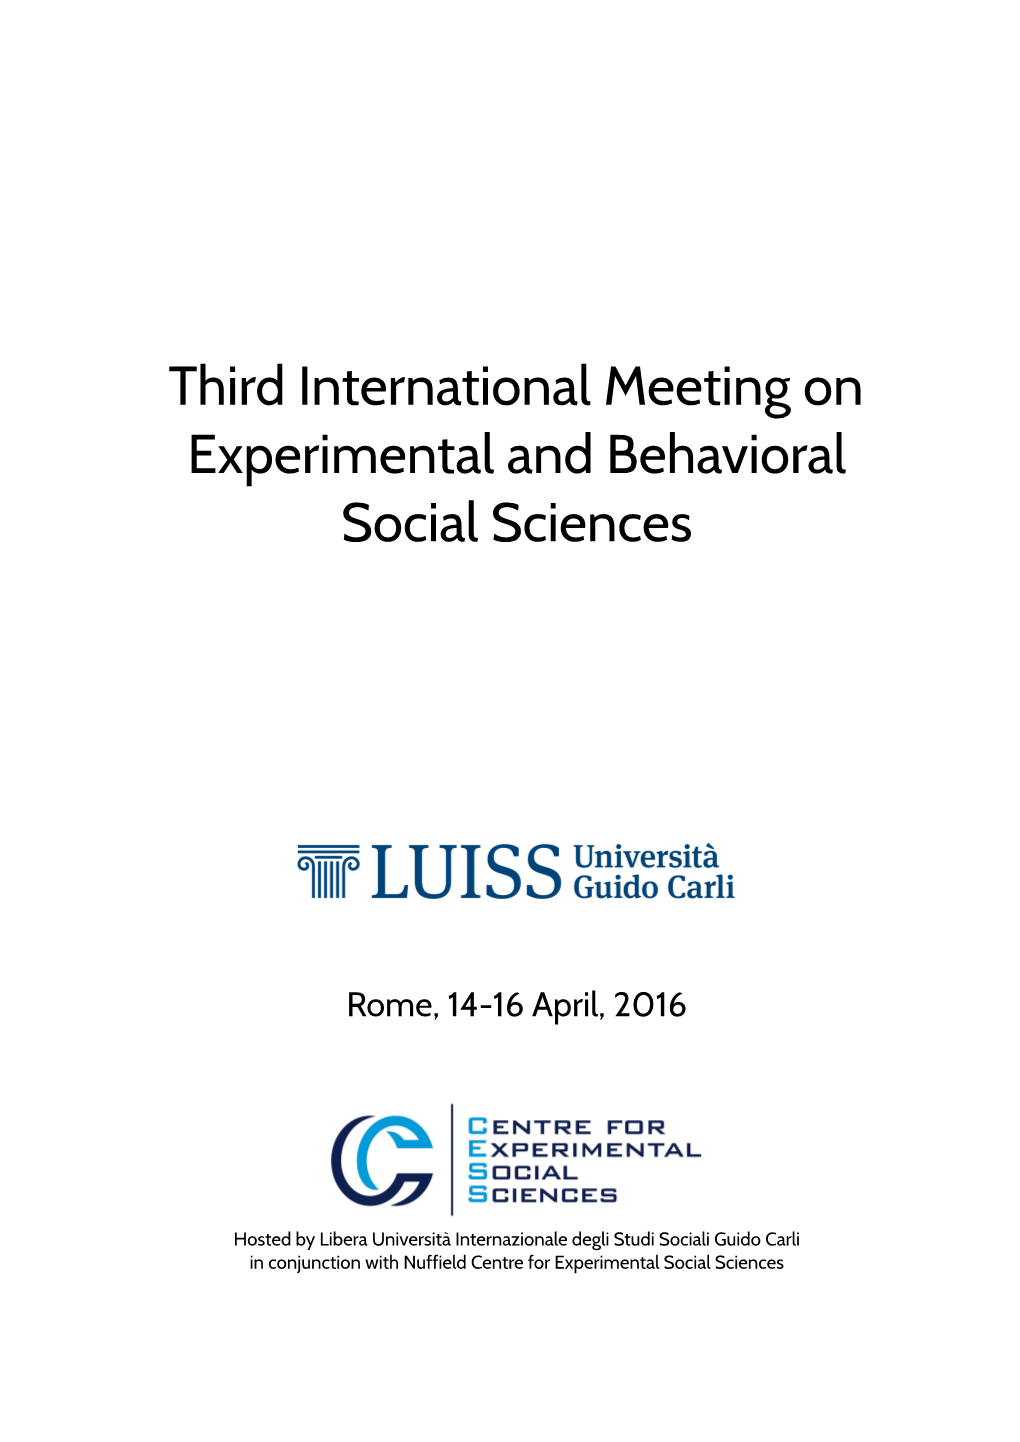 Third International Meeting on Experimental and Behavioral Social Sciences